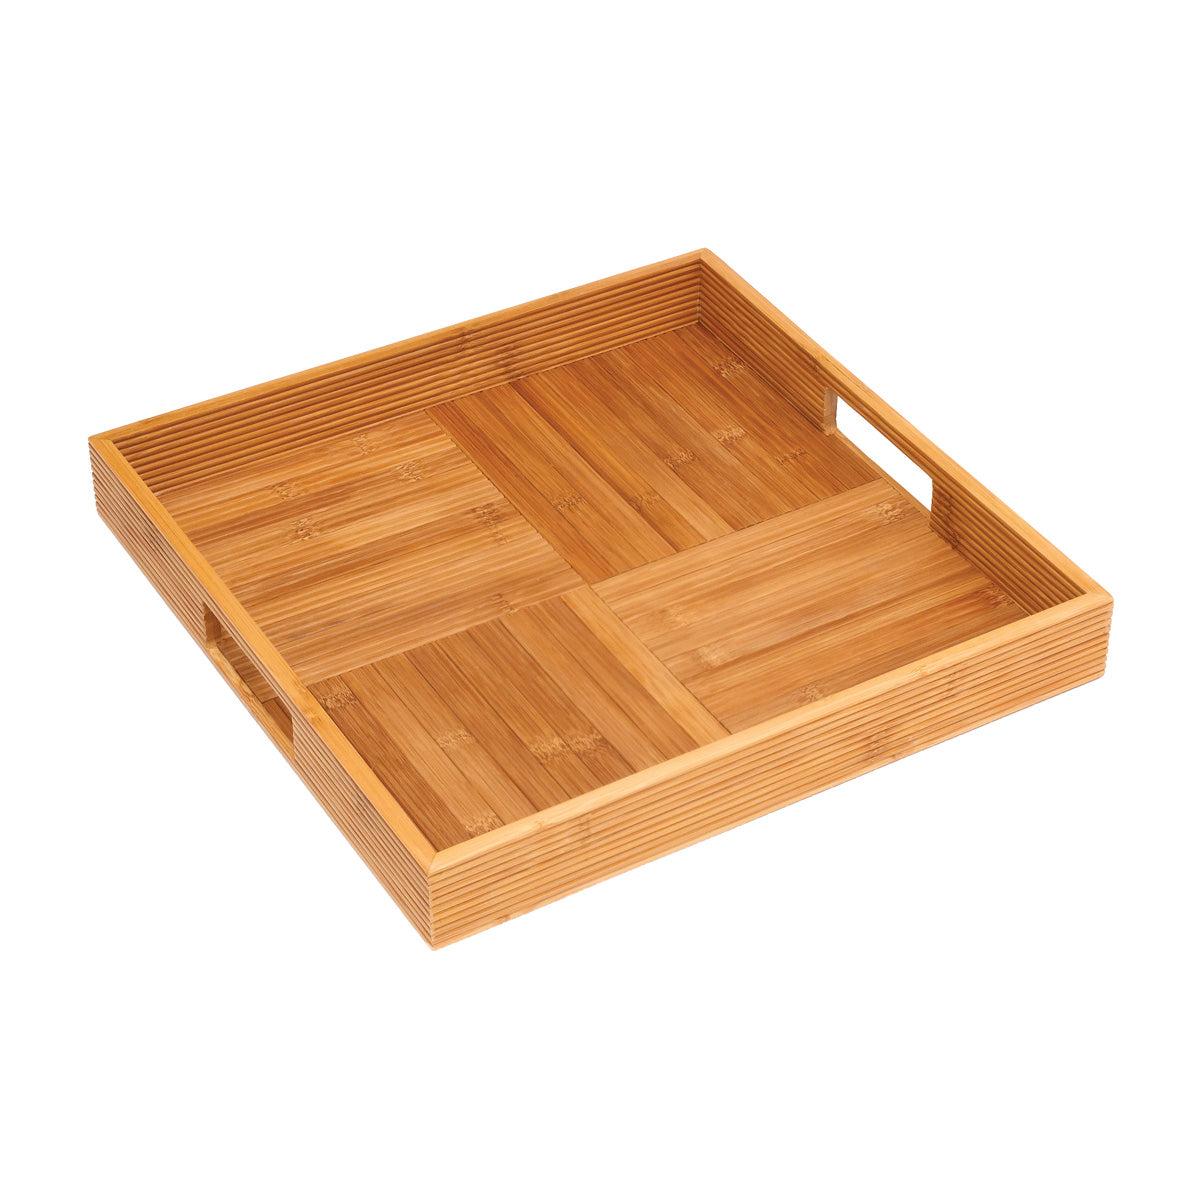 Bamboo Square Serving Tray with Criss Cross Bottom